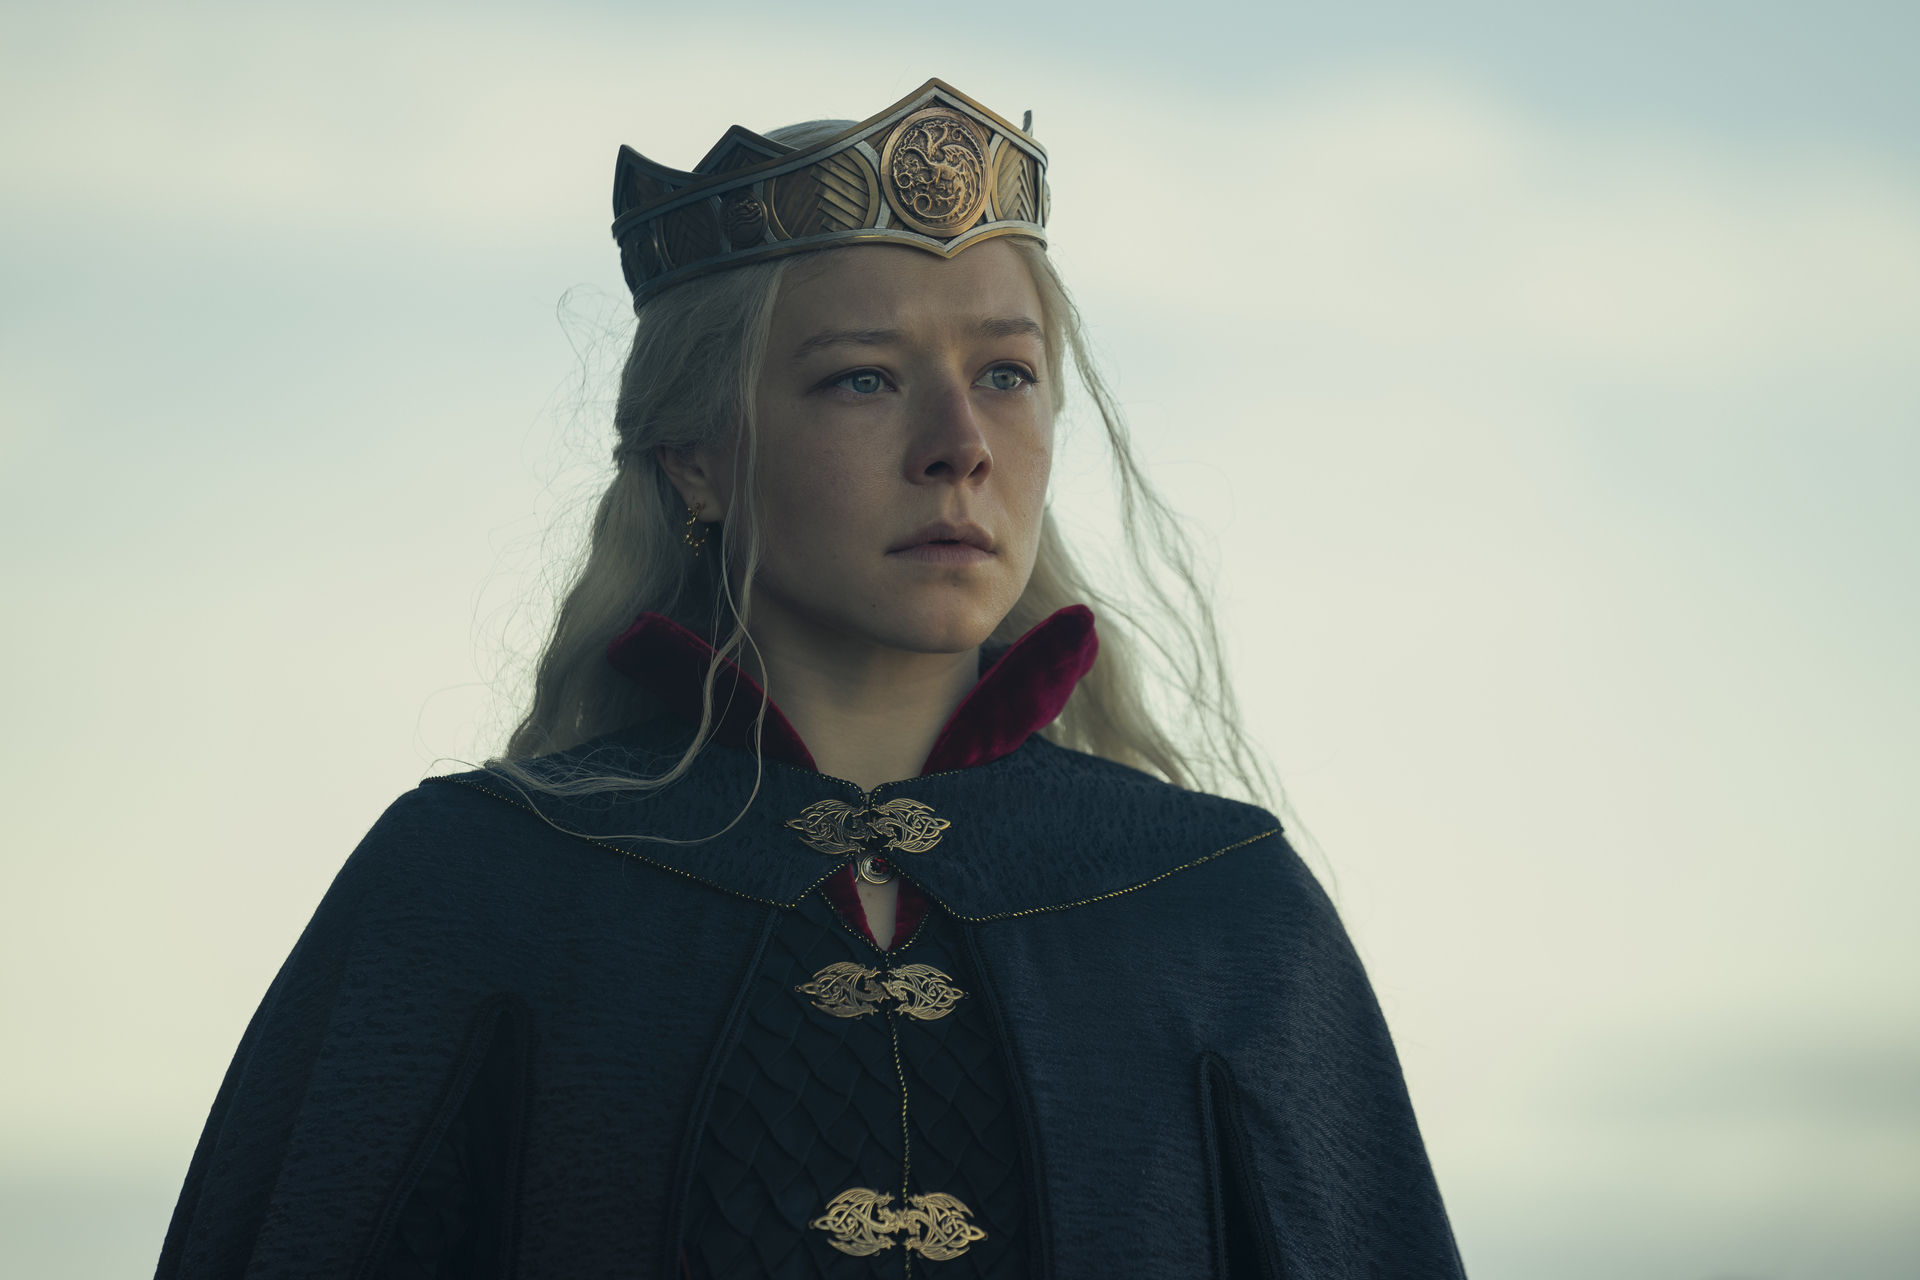 Person in royal attire with crown, gazing into distance, from TV show